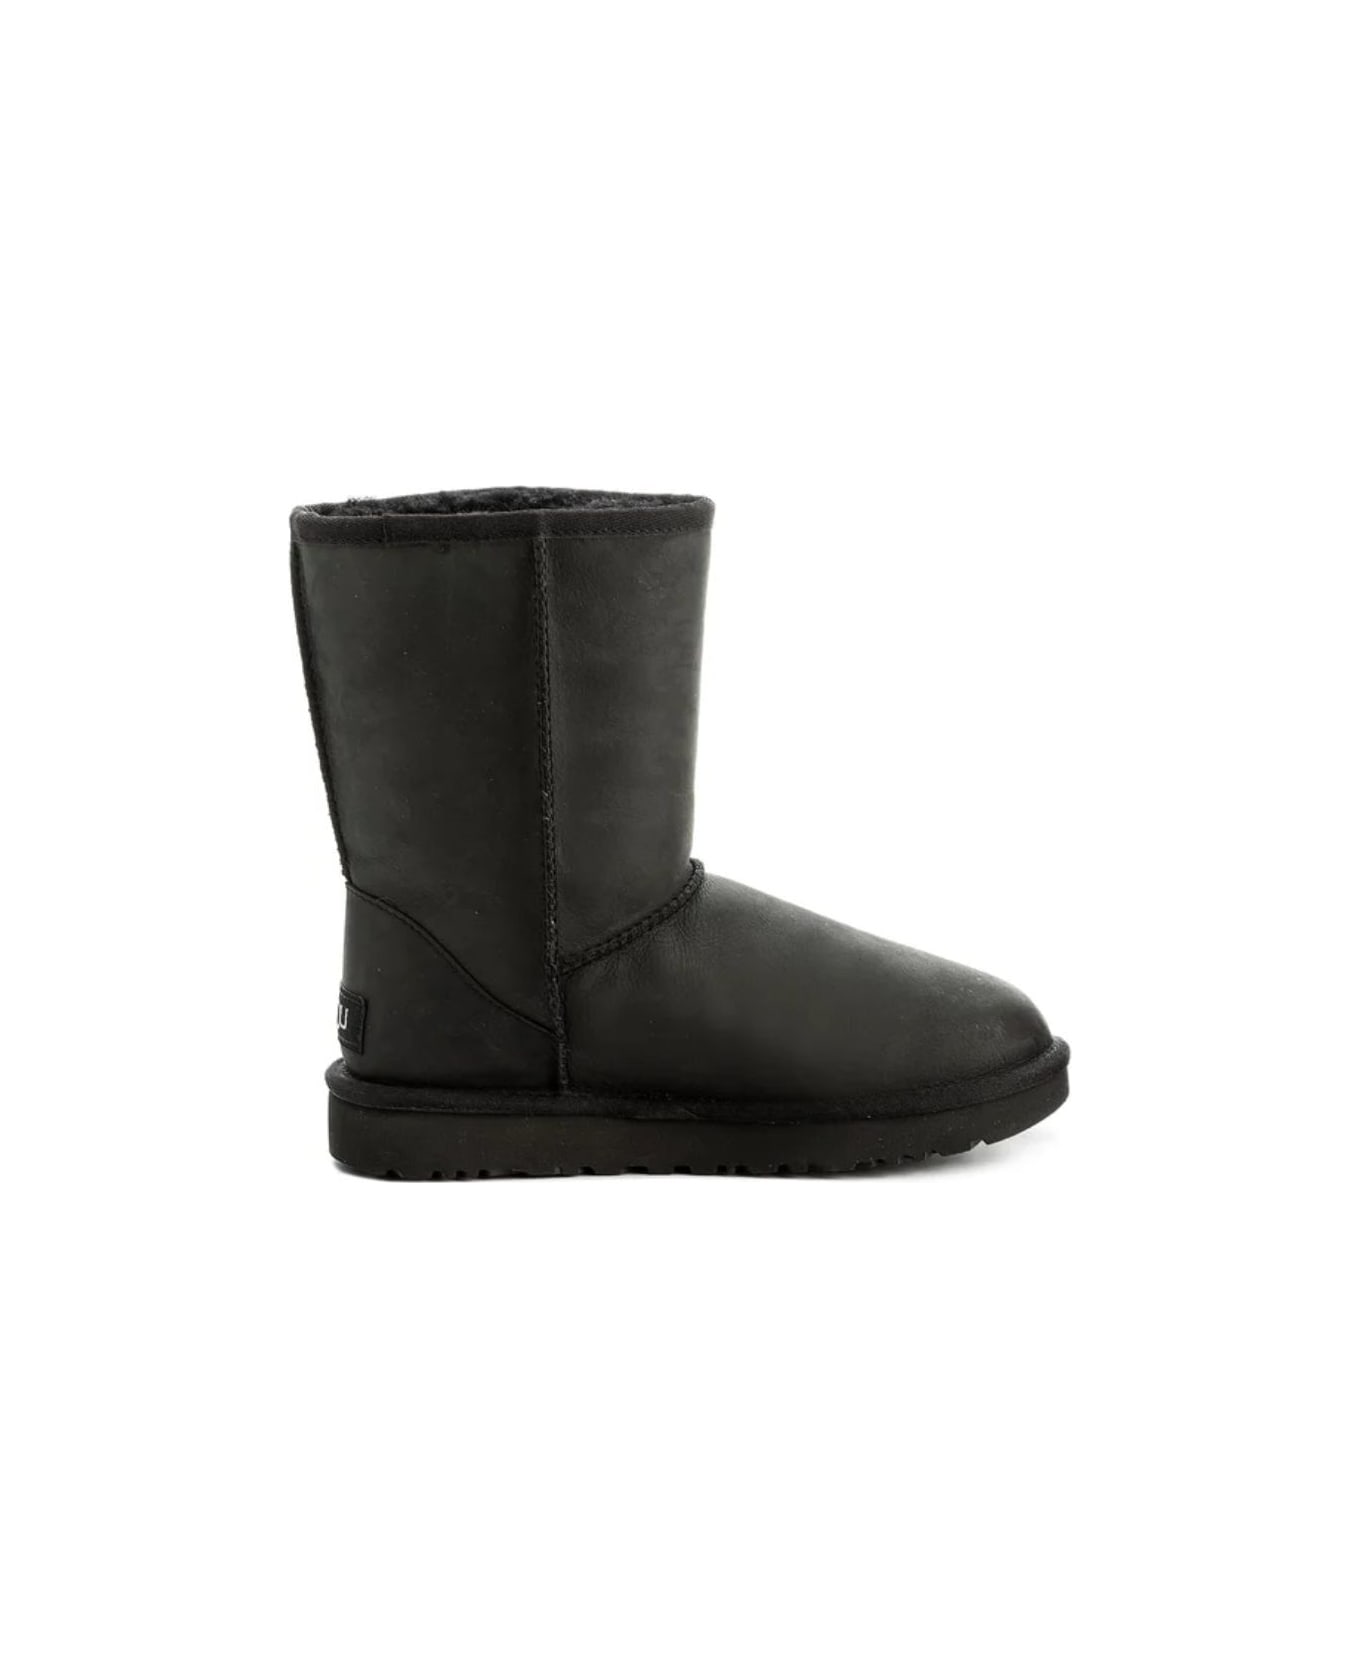 UGG W Classic Short Leather Shoes - Blk Black ブーツ